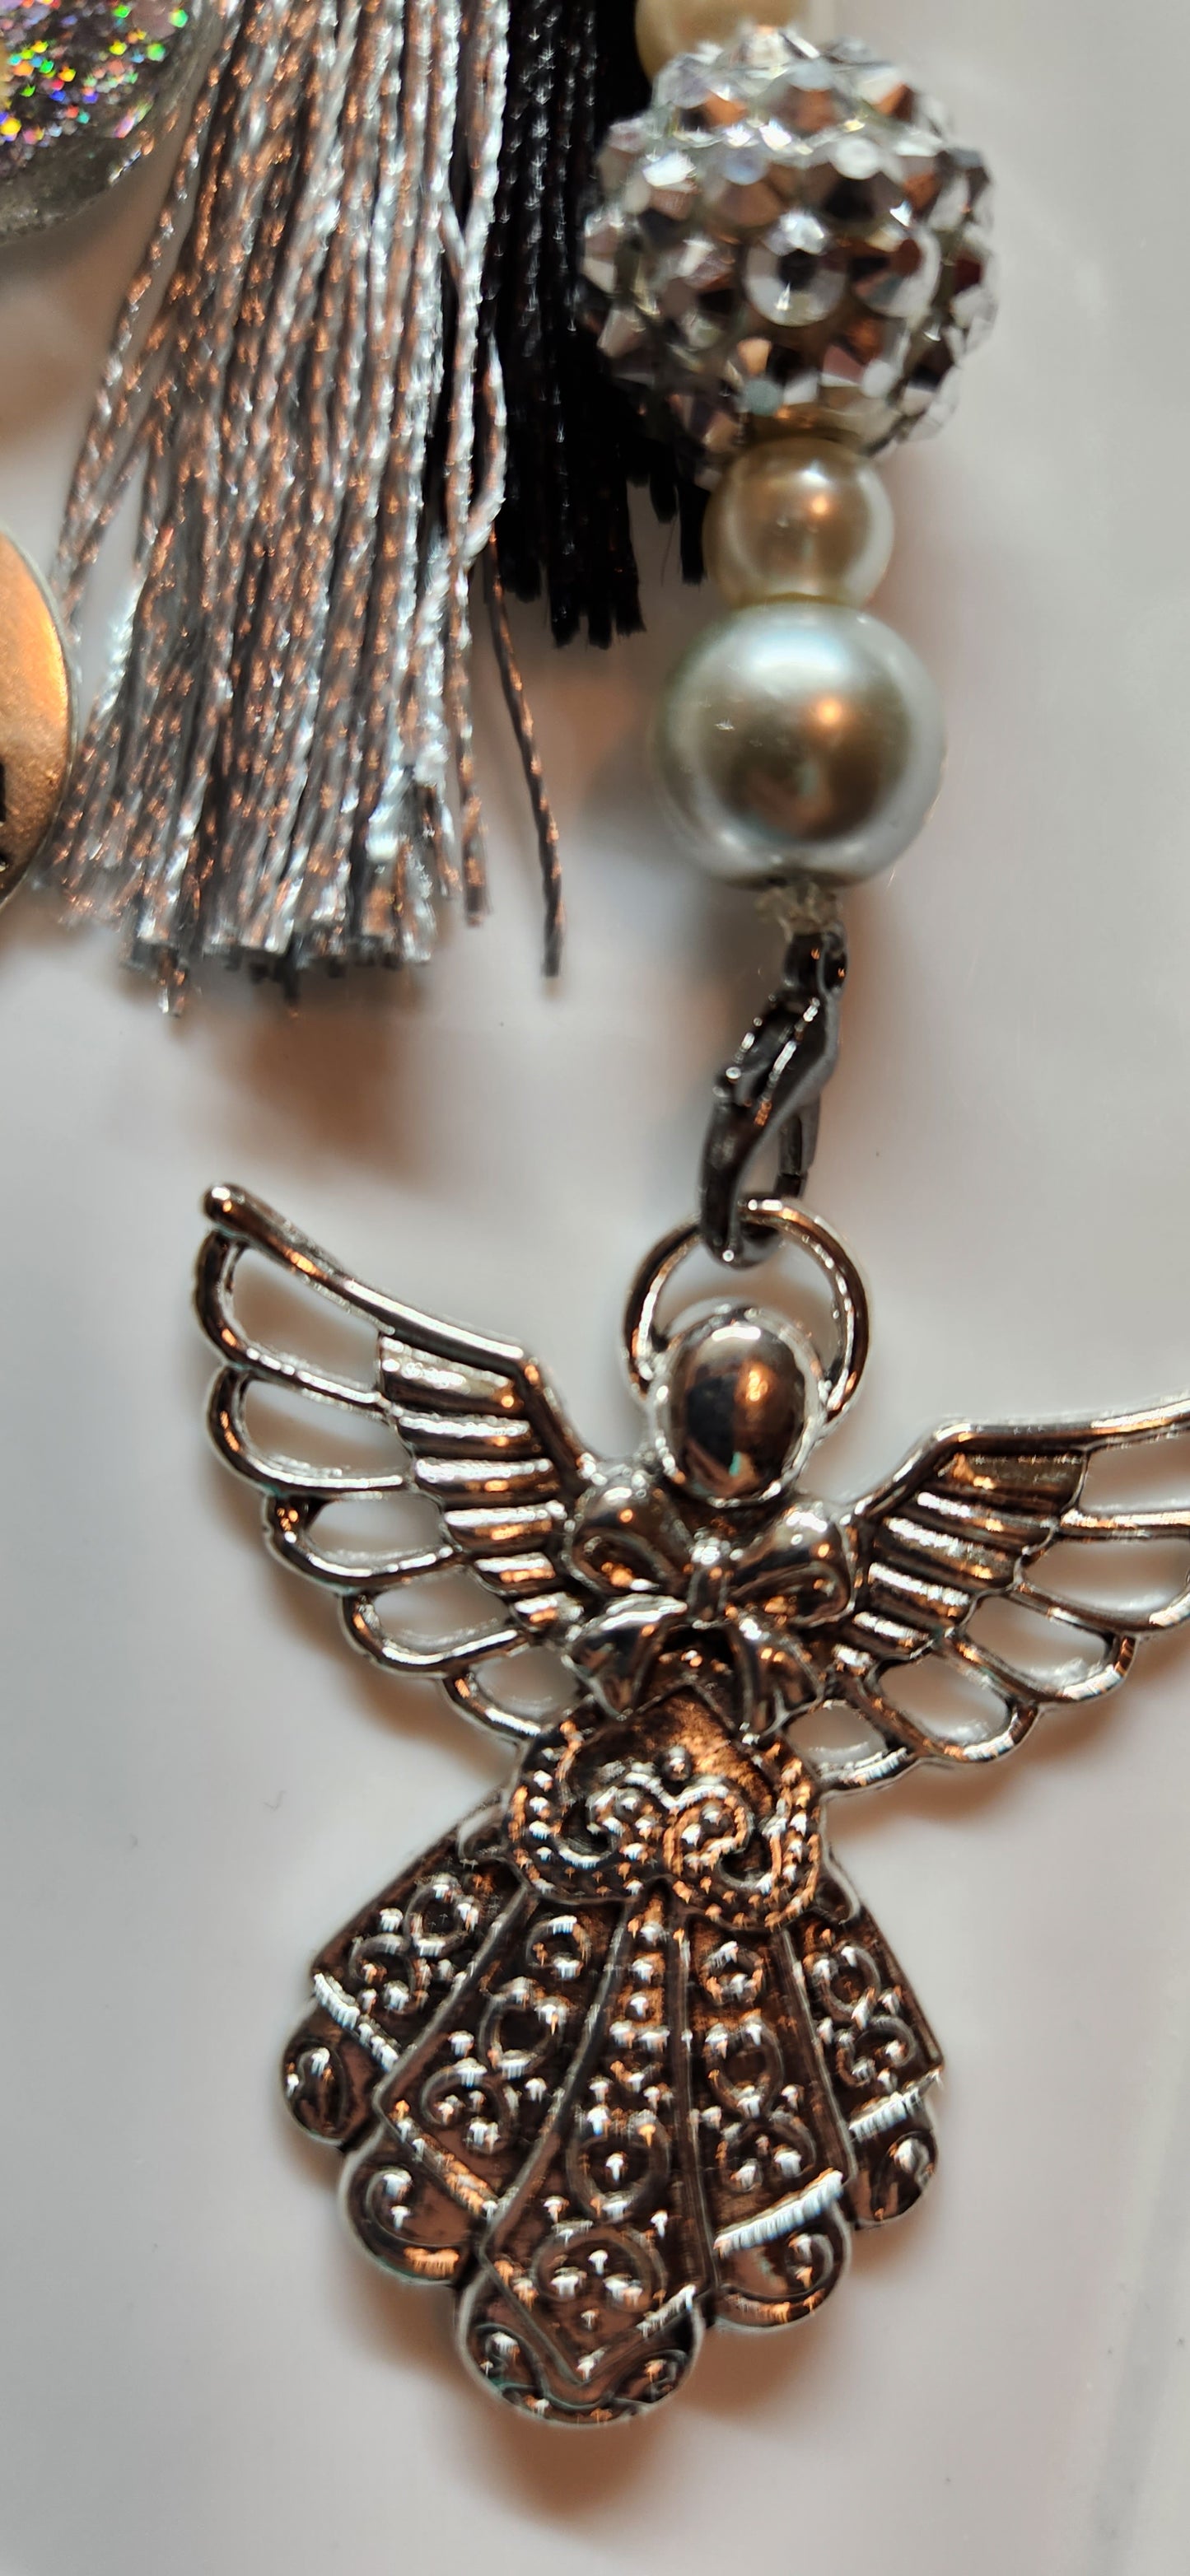 Silver and Black Angel keychain